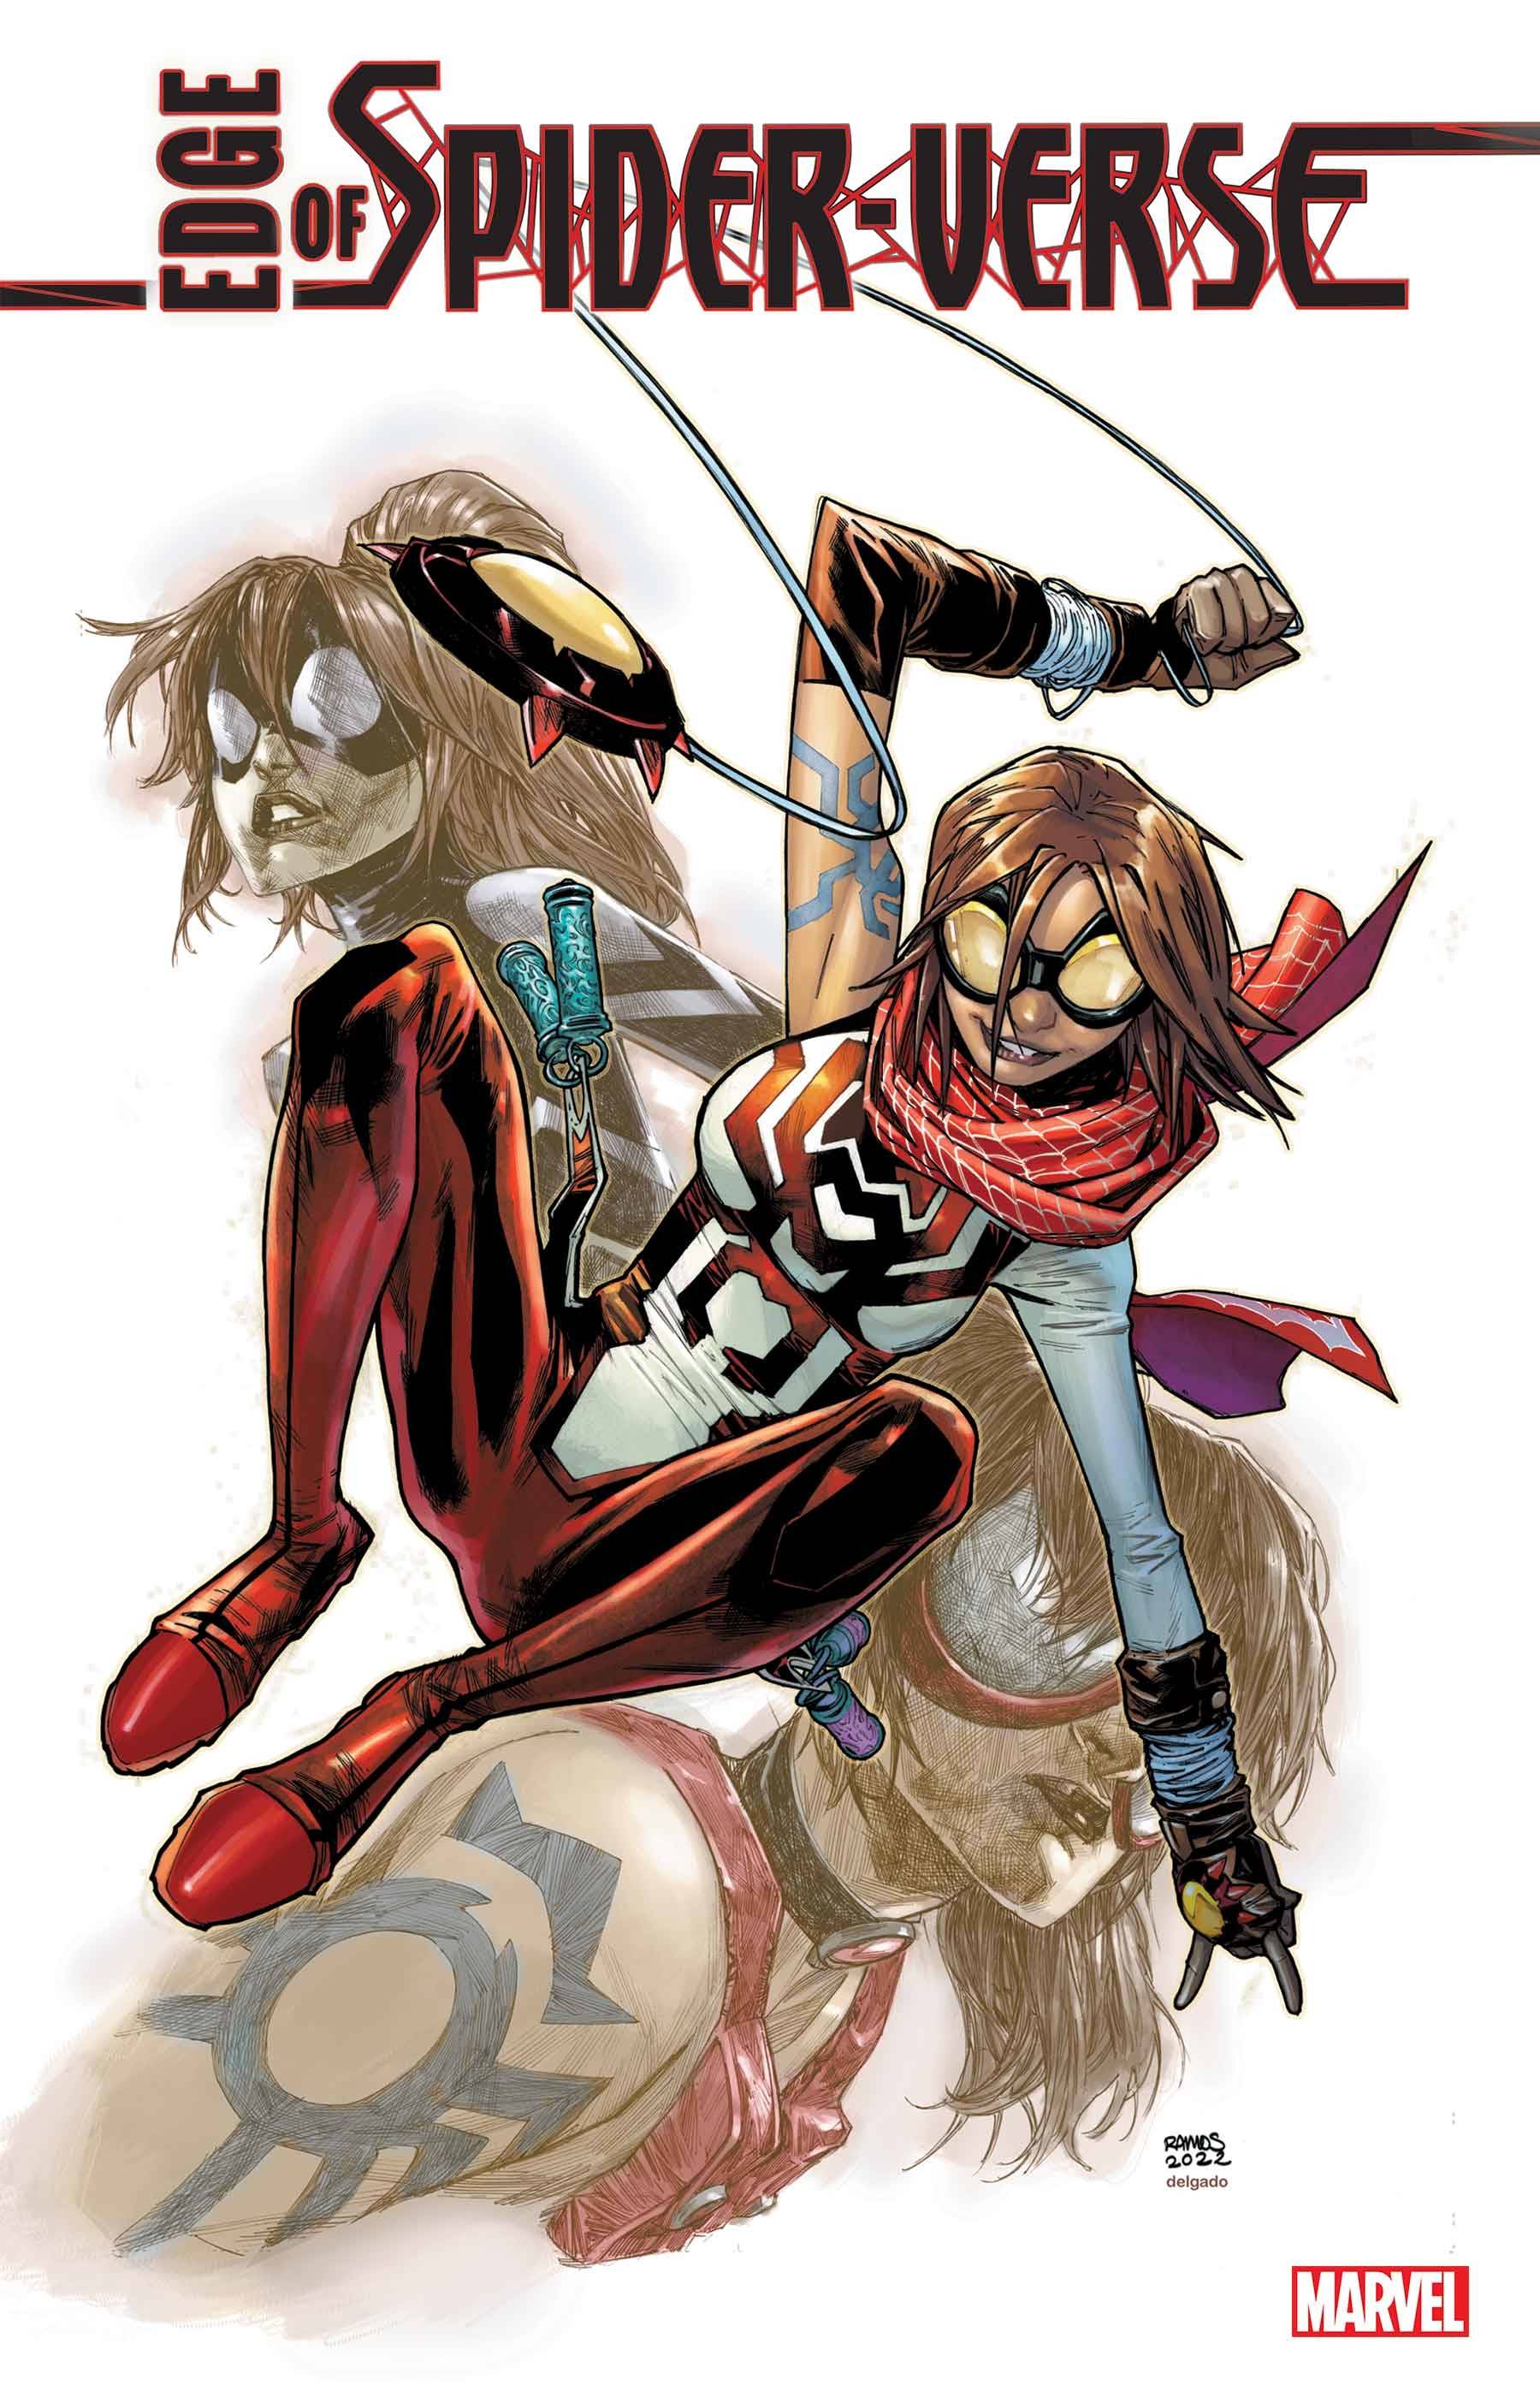 08/03/2022 EDGE OF SPIDER-VERSE #1 (OF 5) RAMOS 1:25 VARIANT